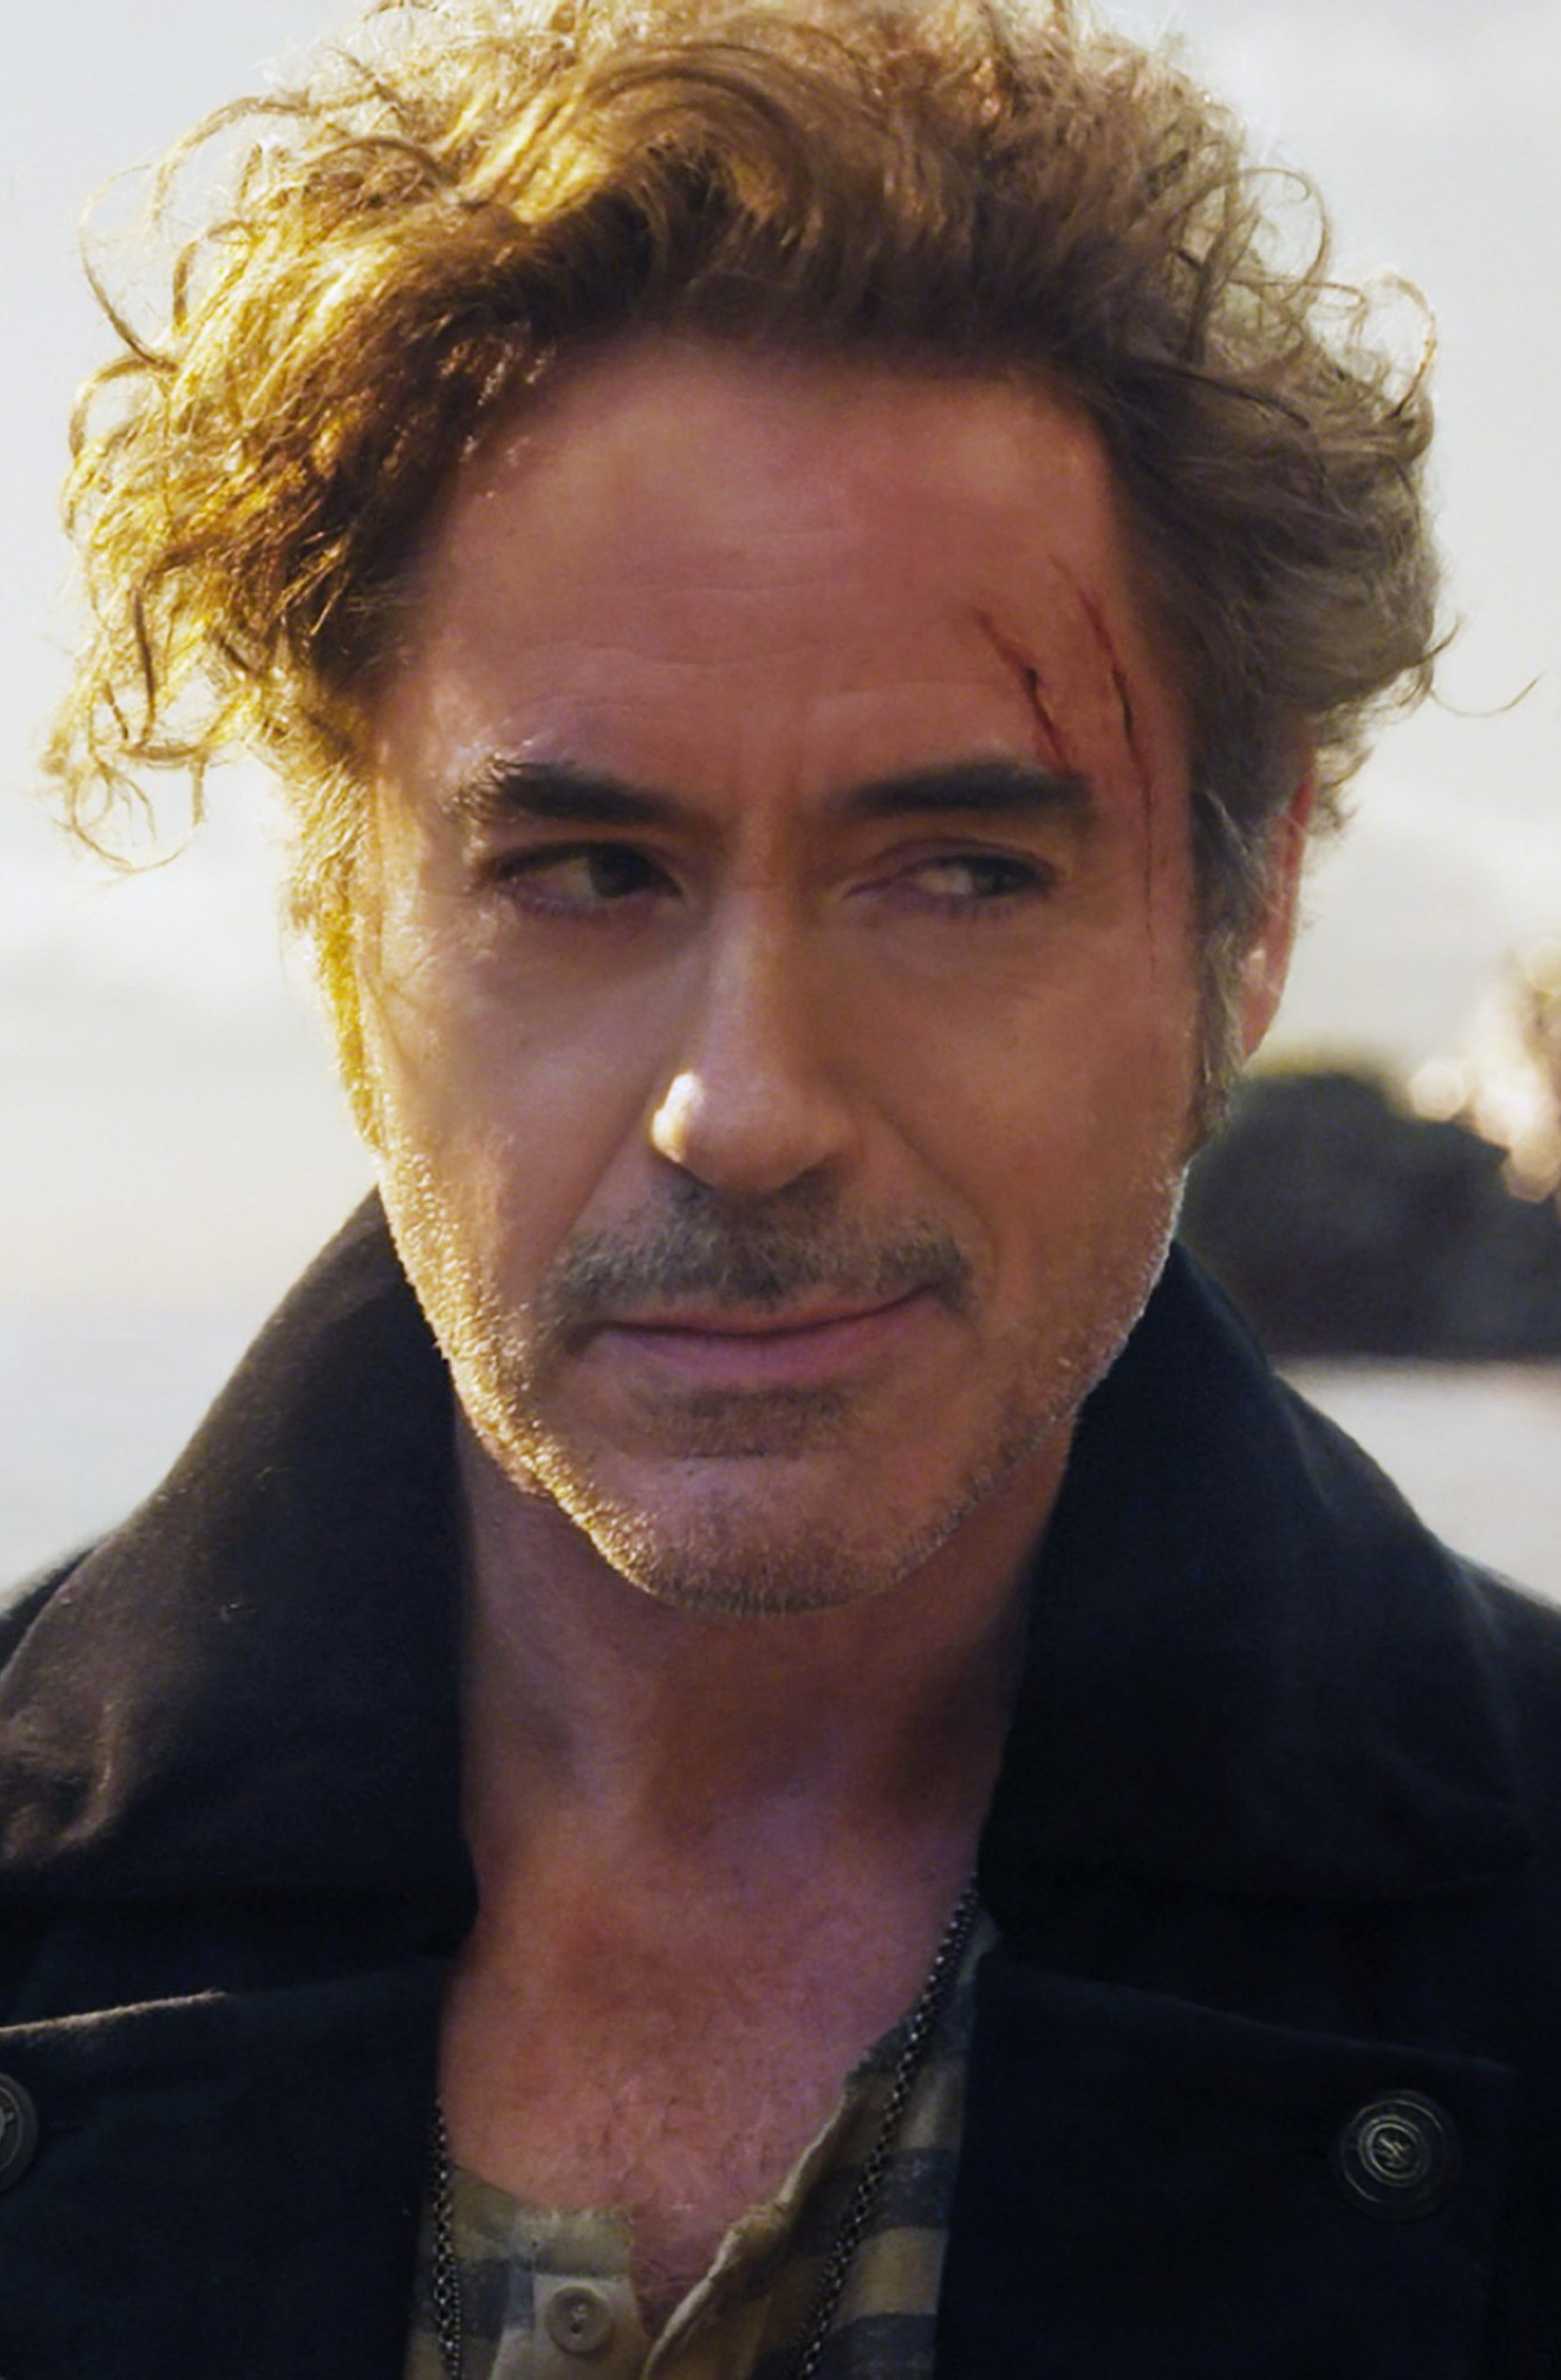 Downey Jr. on a ship with two scars on his face